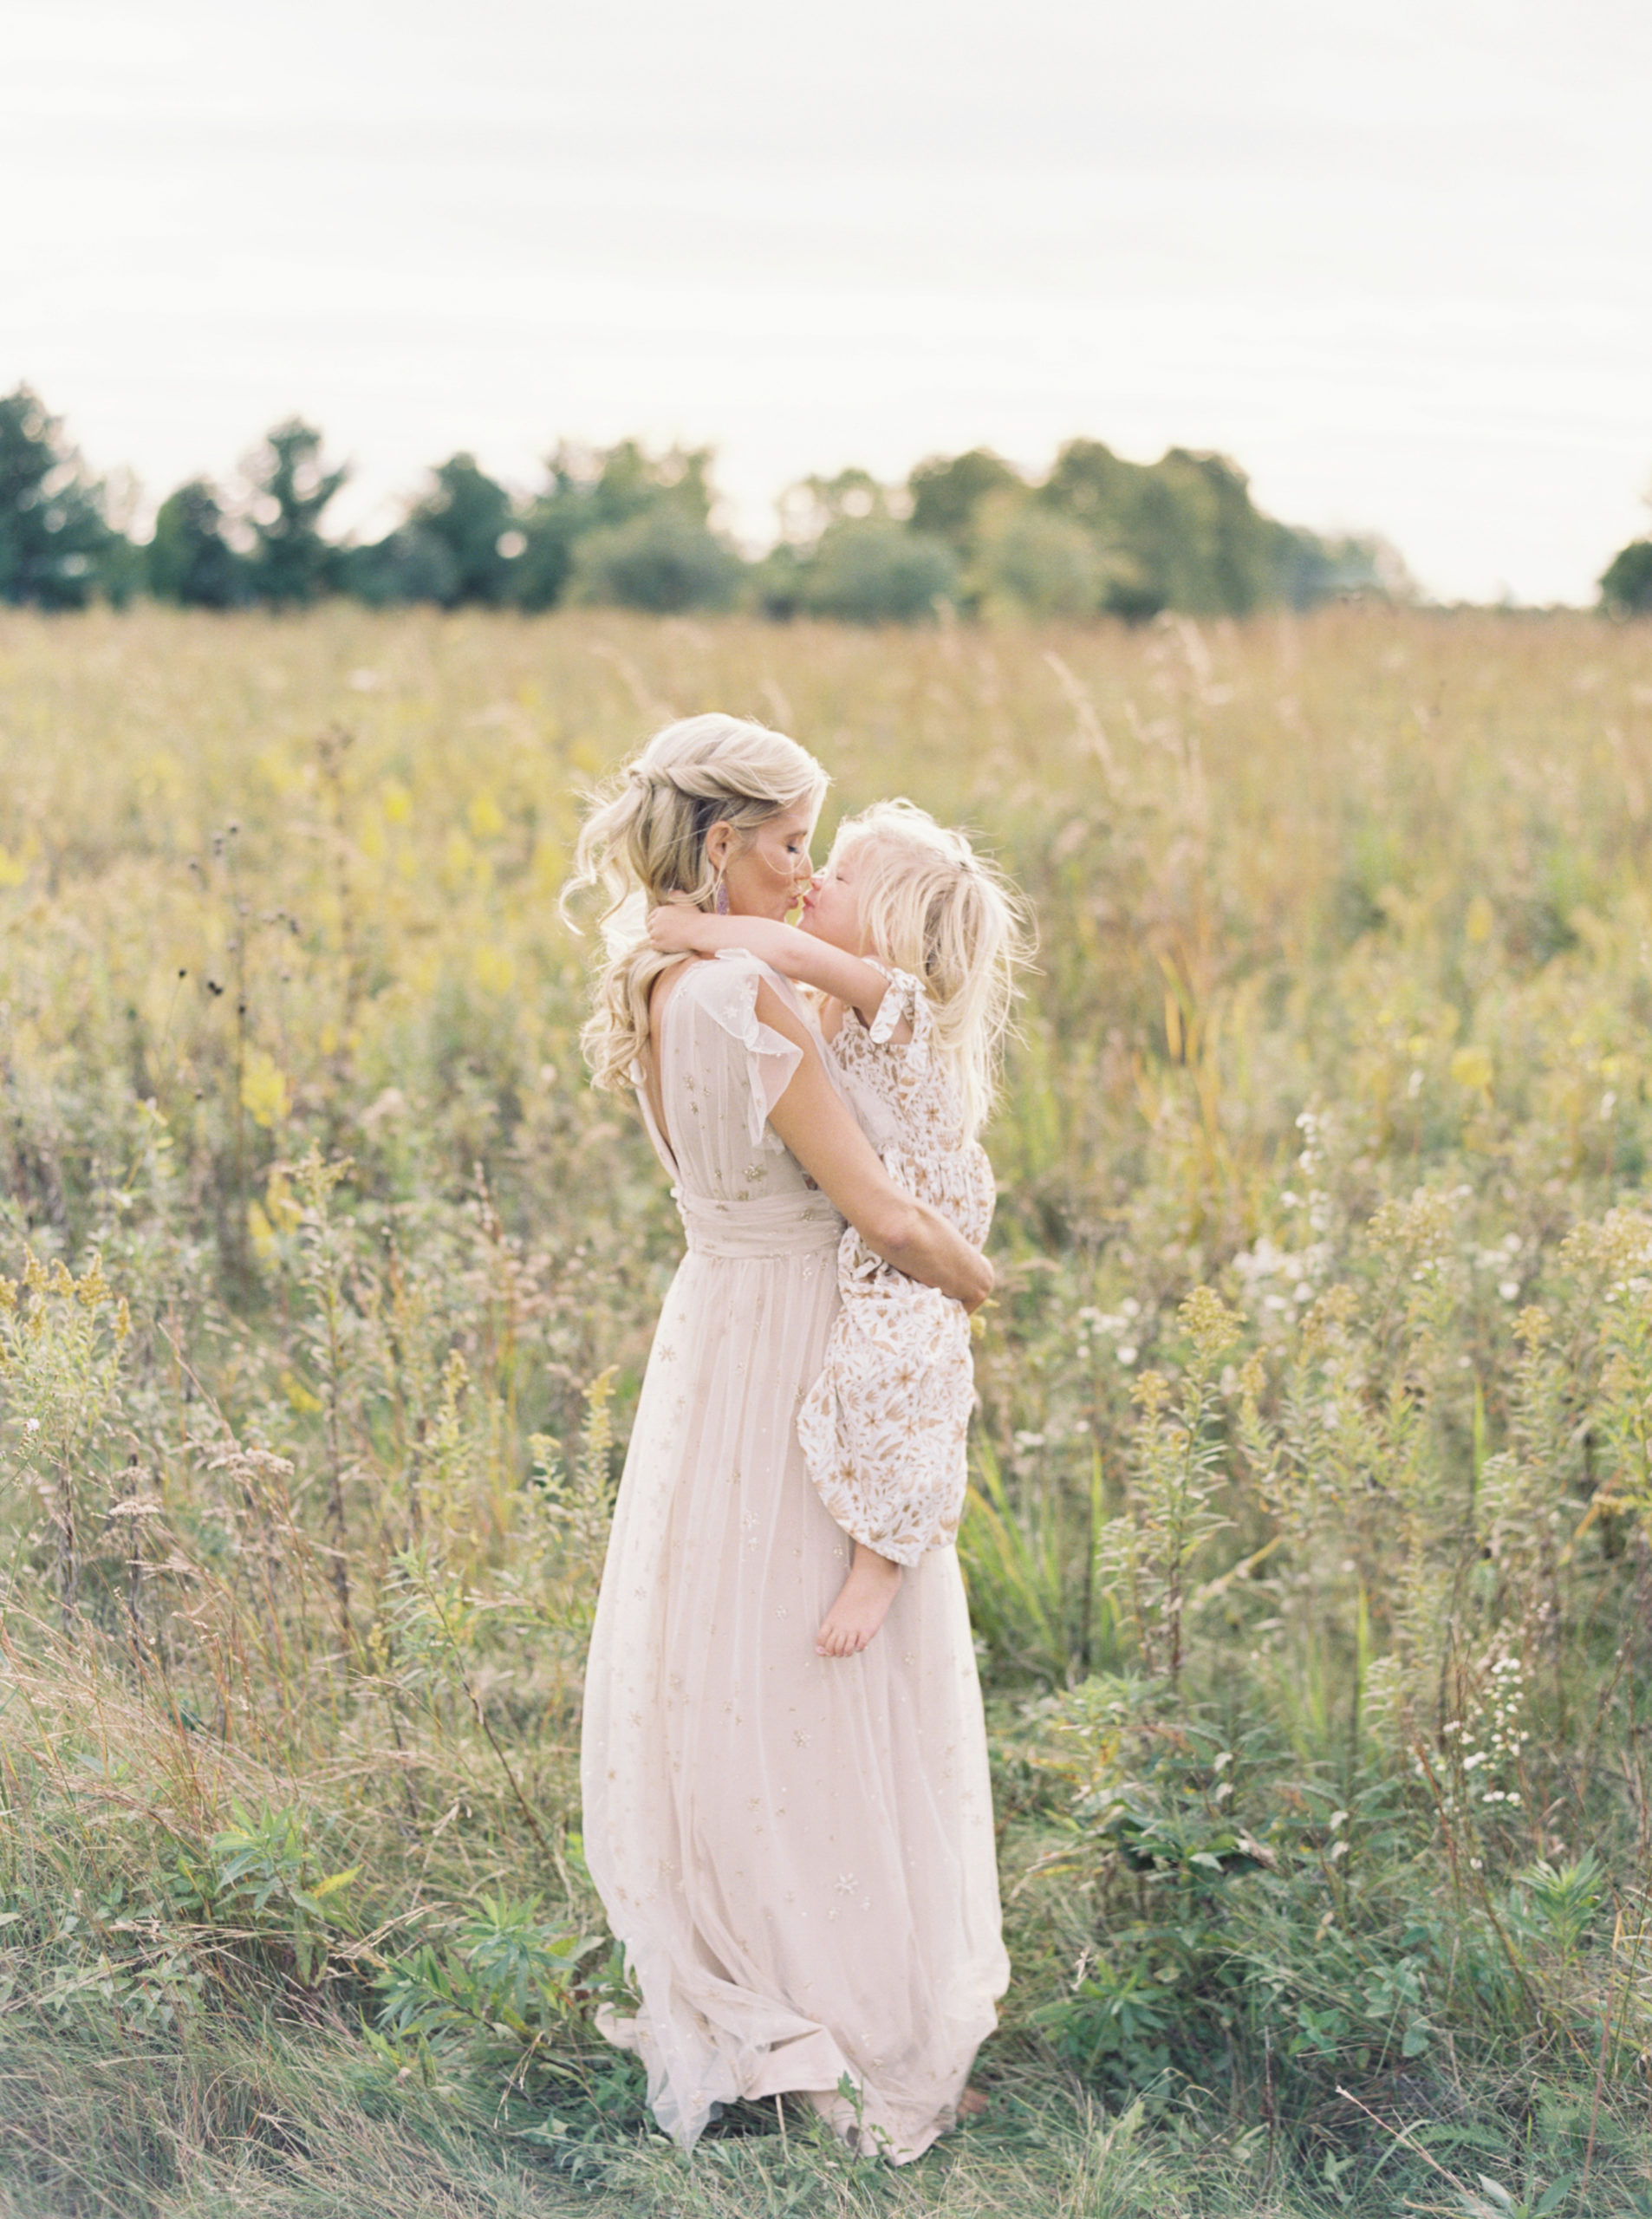 Mother and daughter cuddle and kiss in middleton grassy field